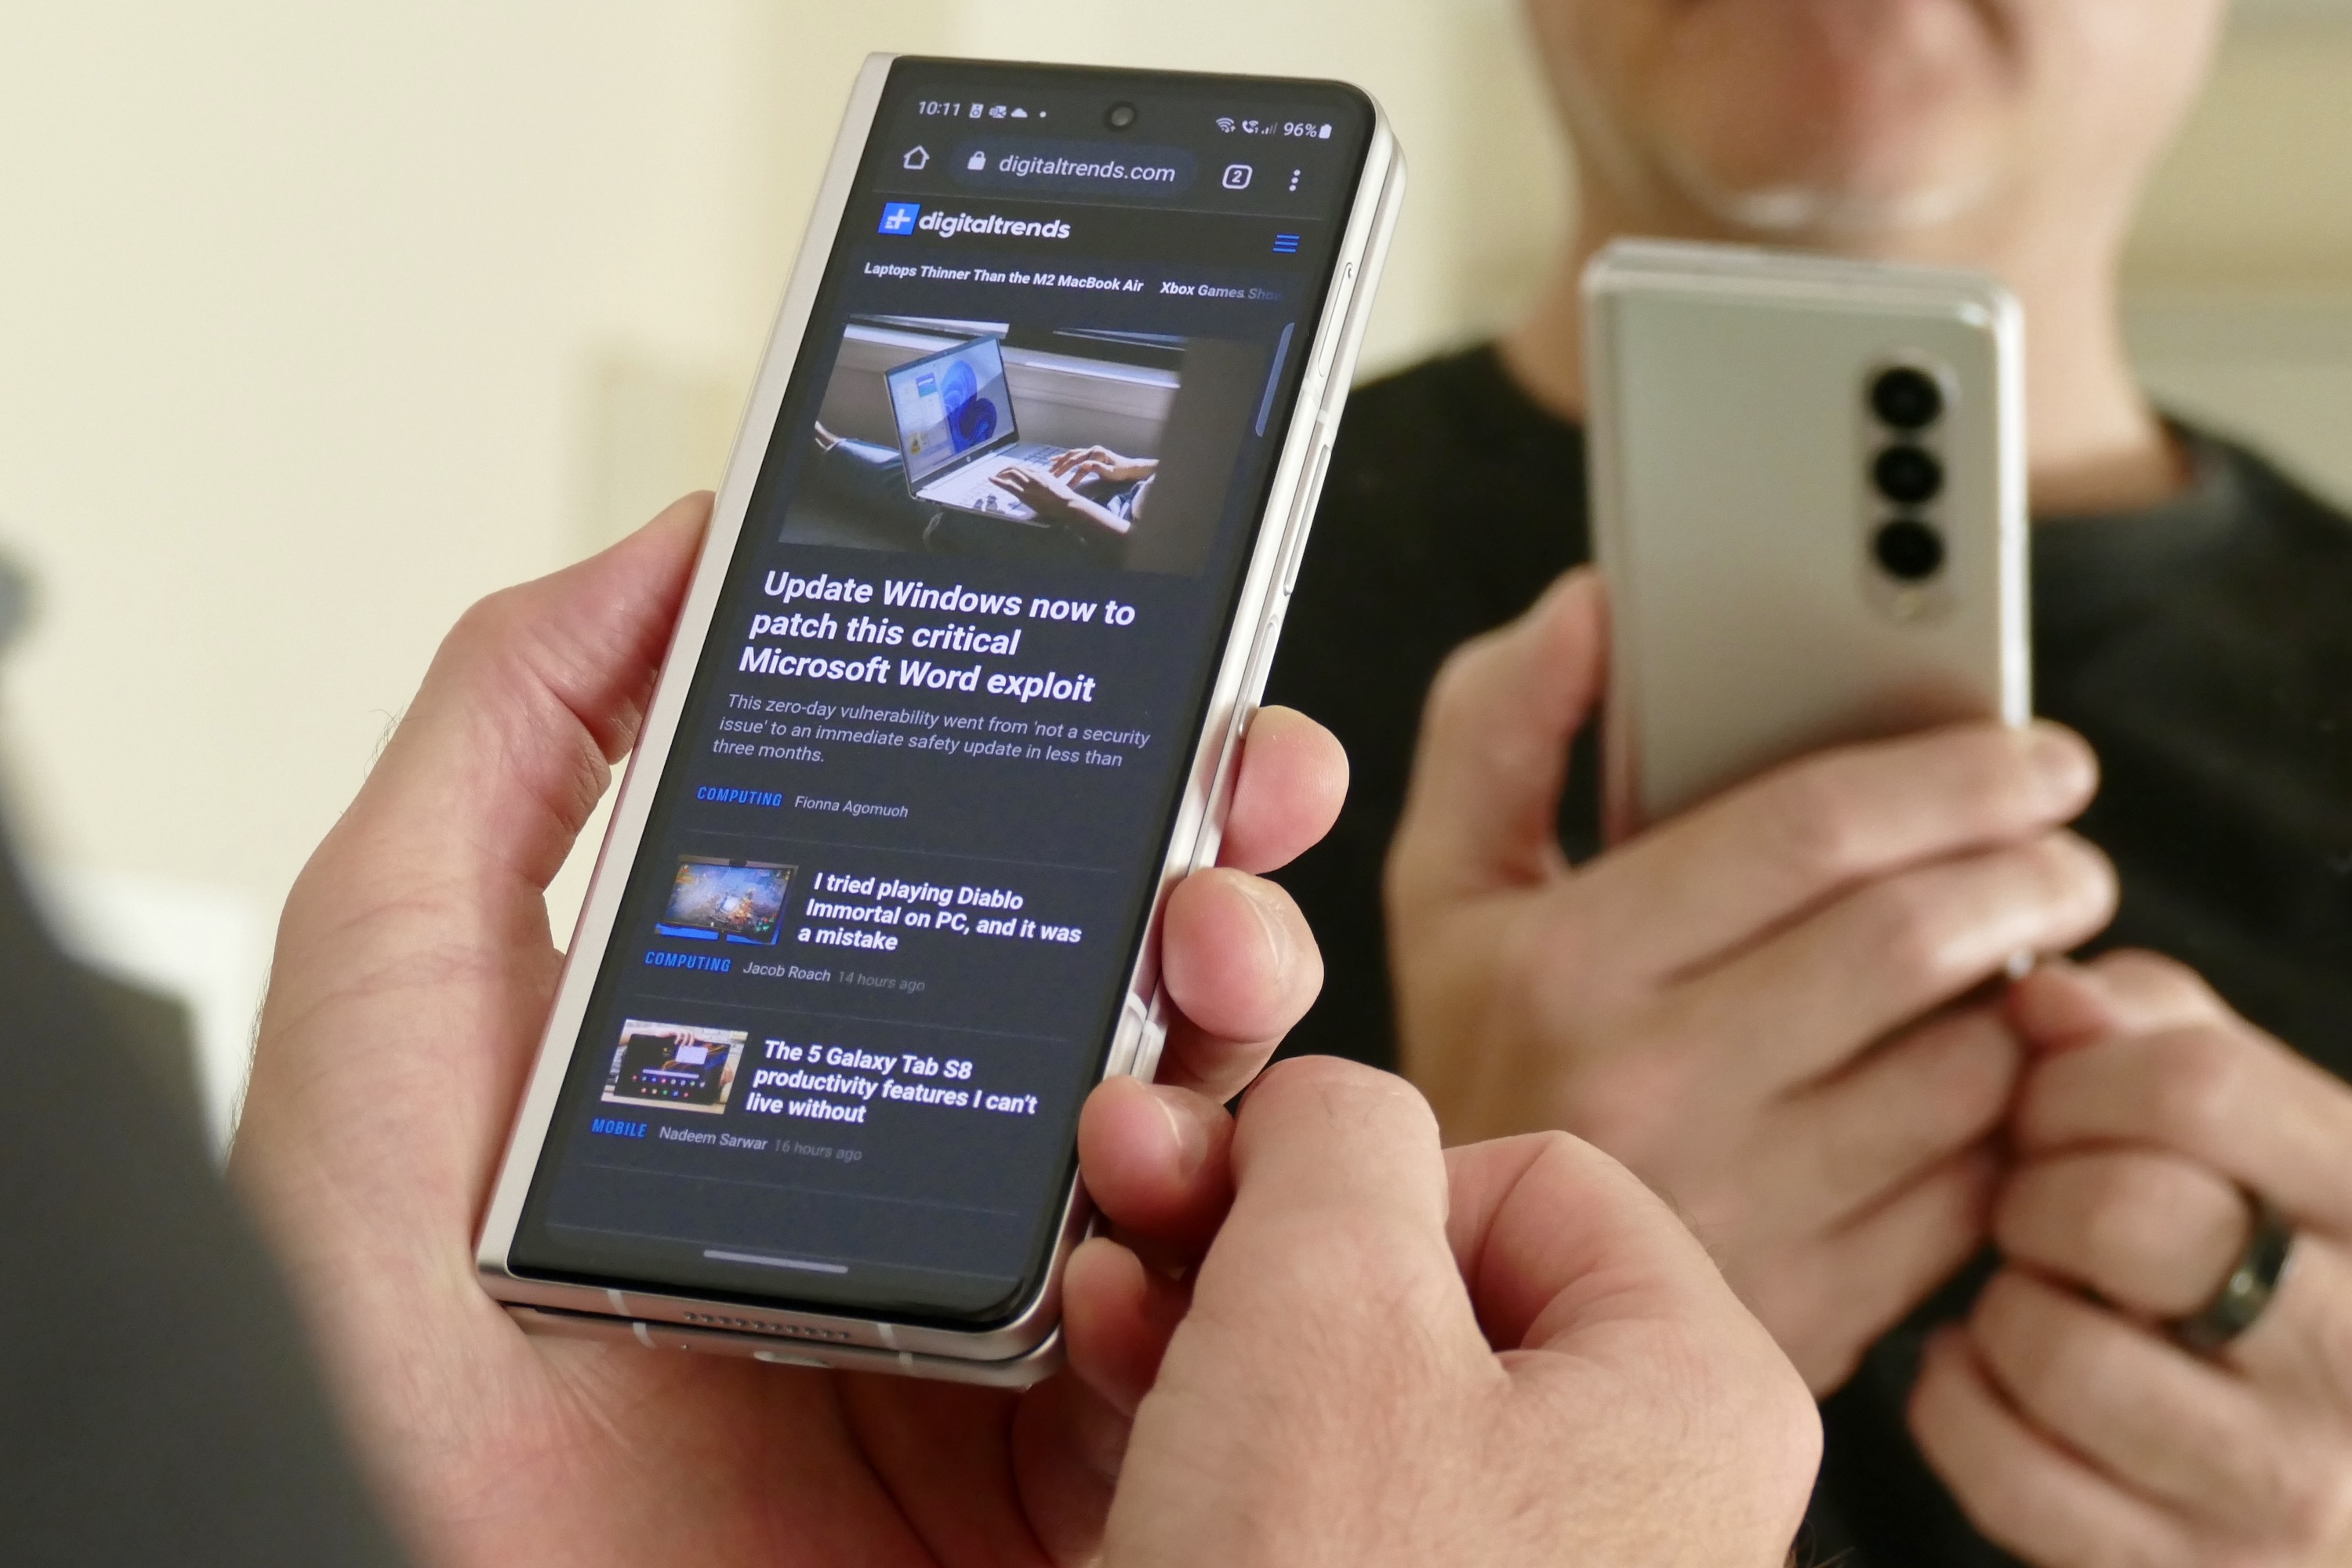 Samsung Galaxy Z Fold 2 review: Waiting on the world to change